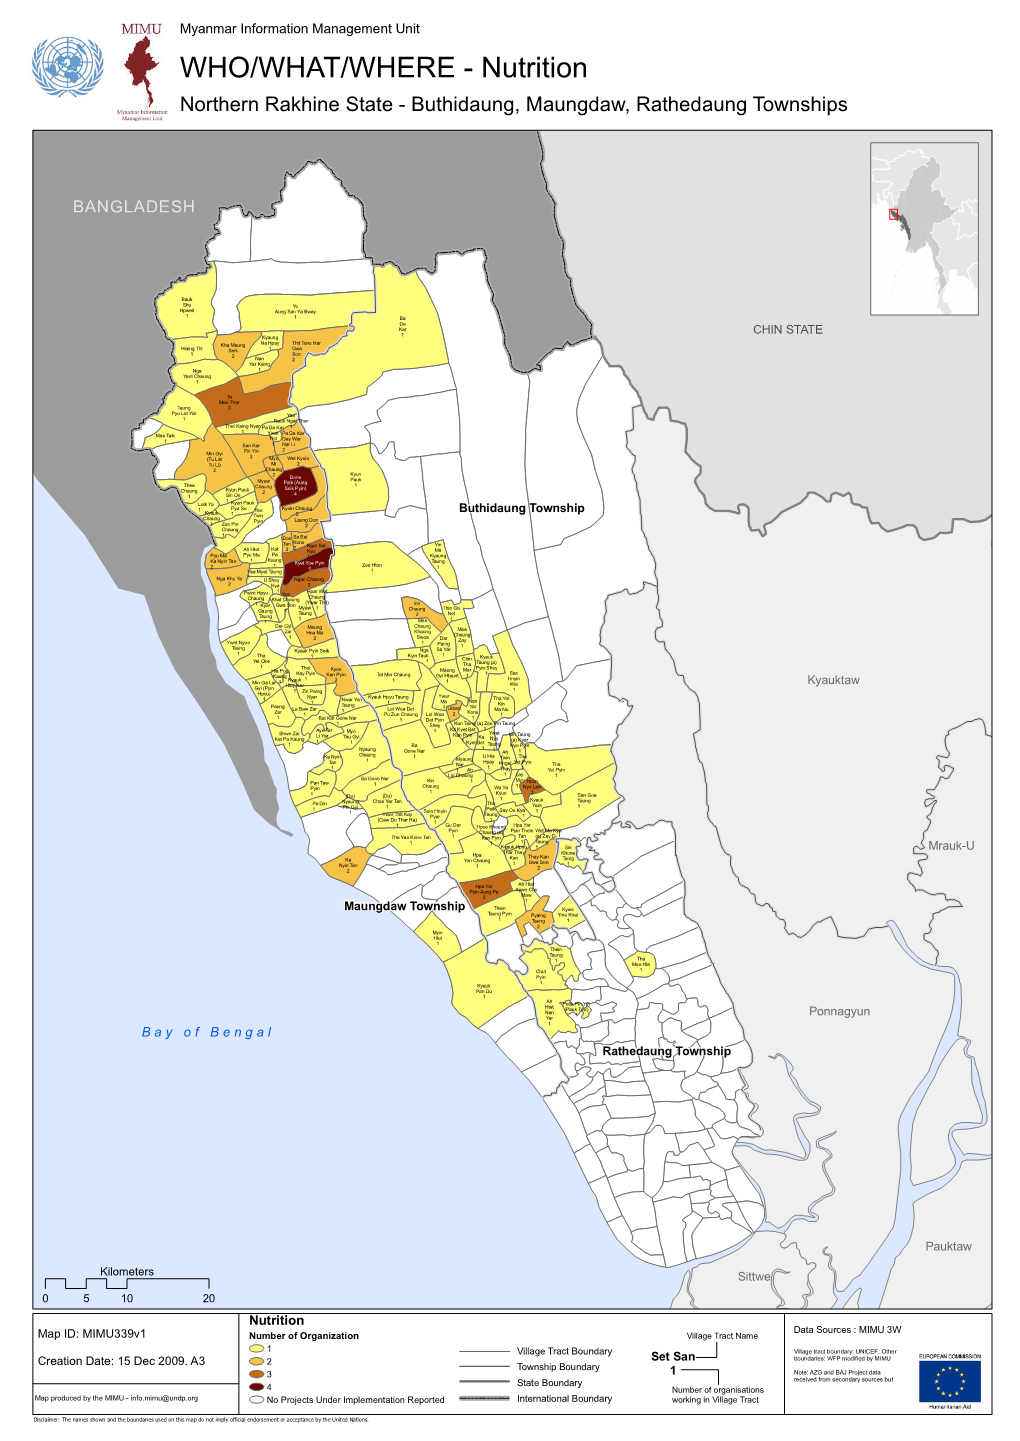 WHO/WHAT/WHERE - Nutrition Northern Rakhine State - Buthidaung, Maungdaw, Rathedaung Townships